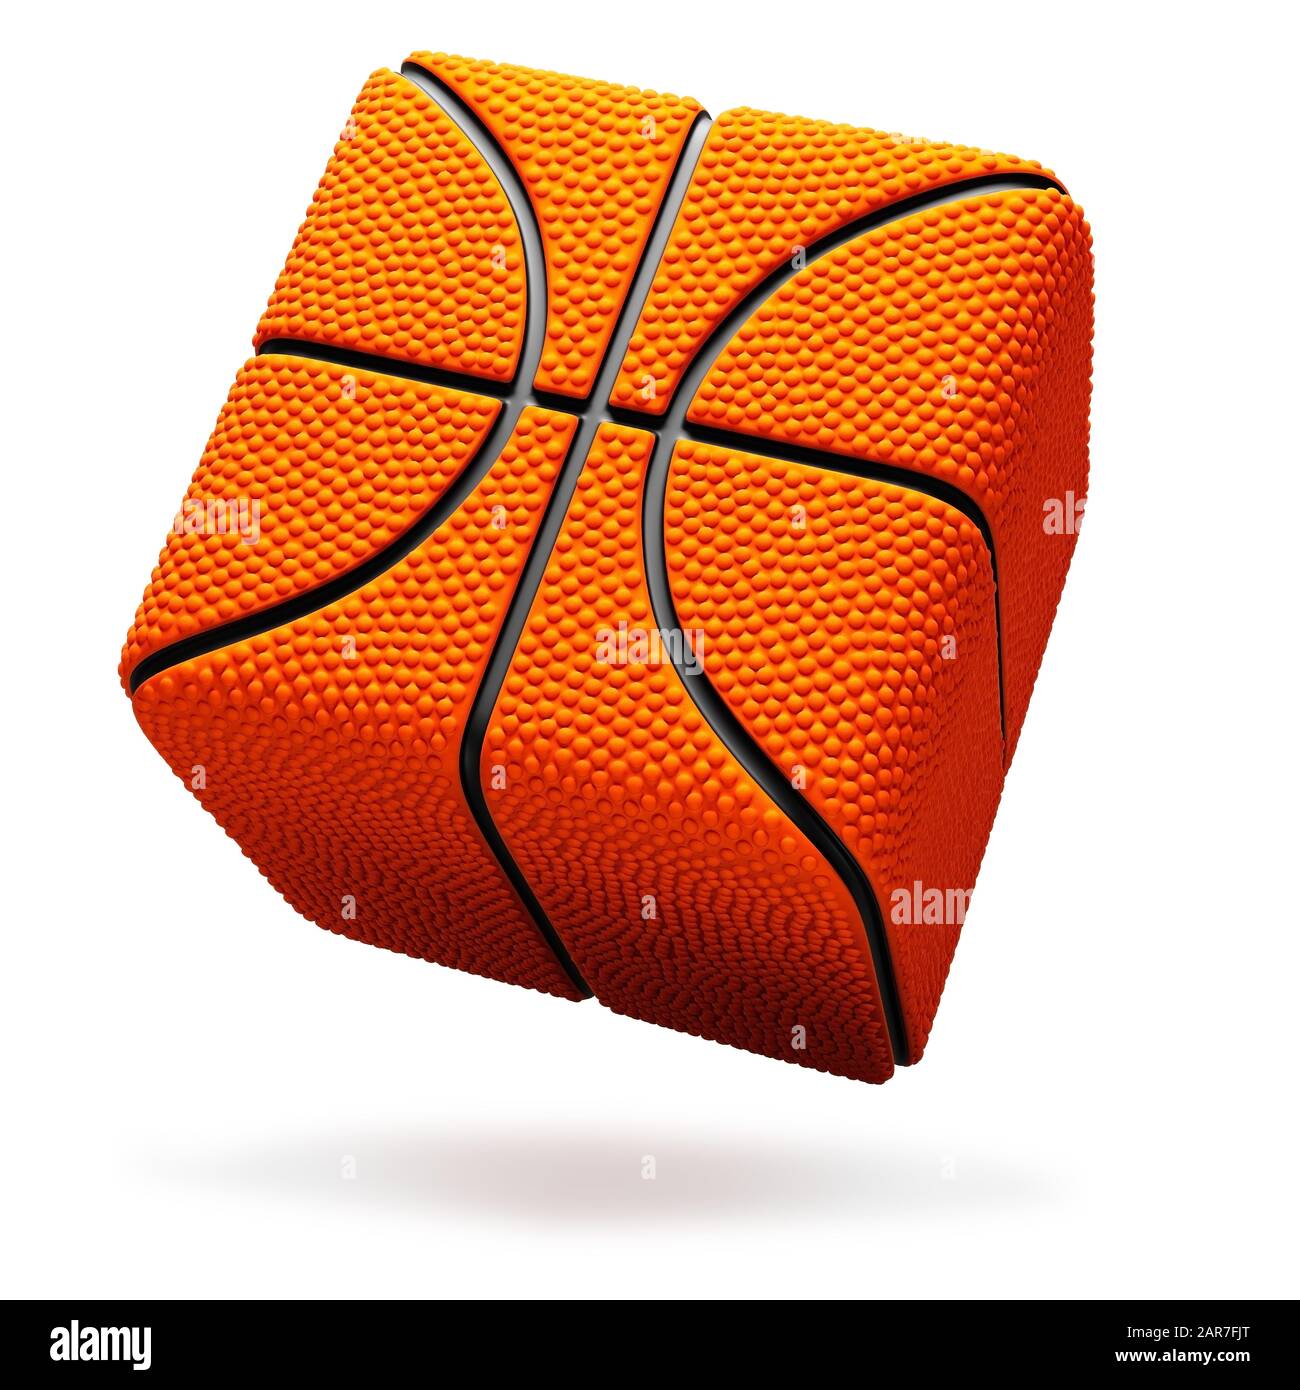 Basketball balls cube bouncing on a white background. Cut out Stock Photo